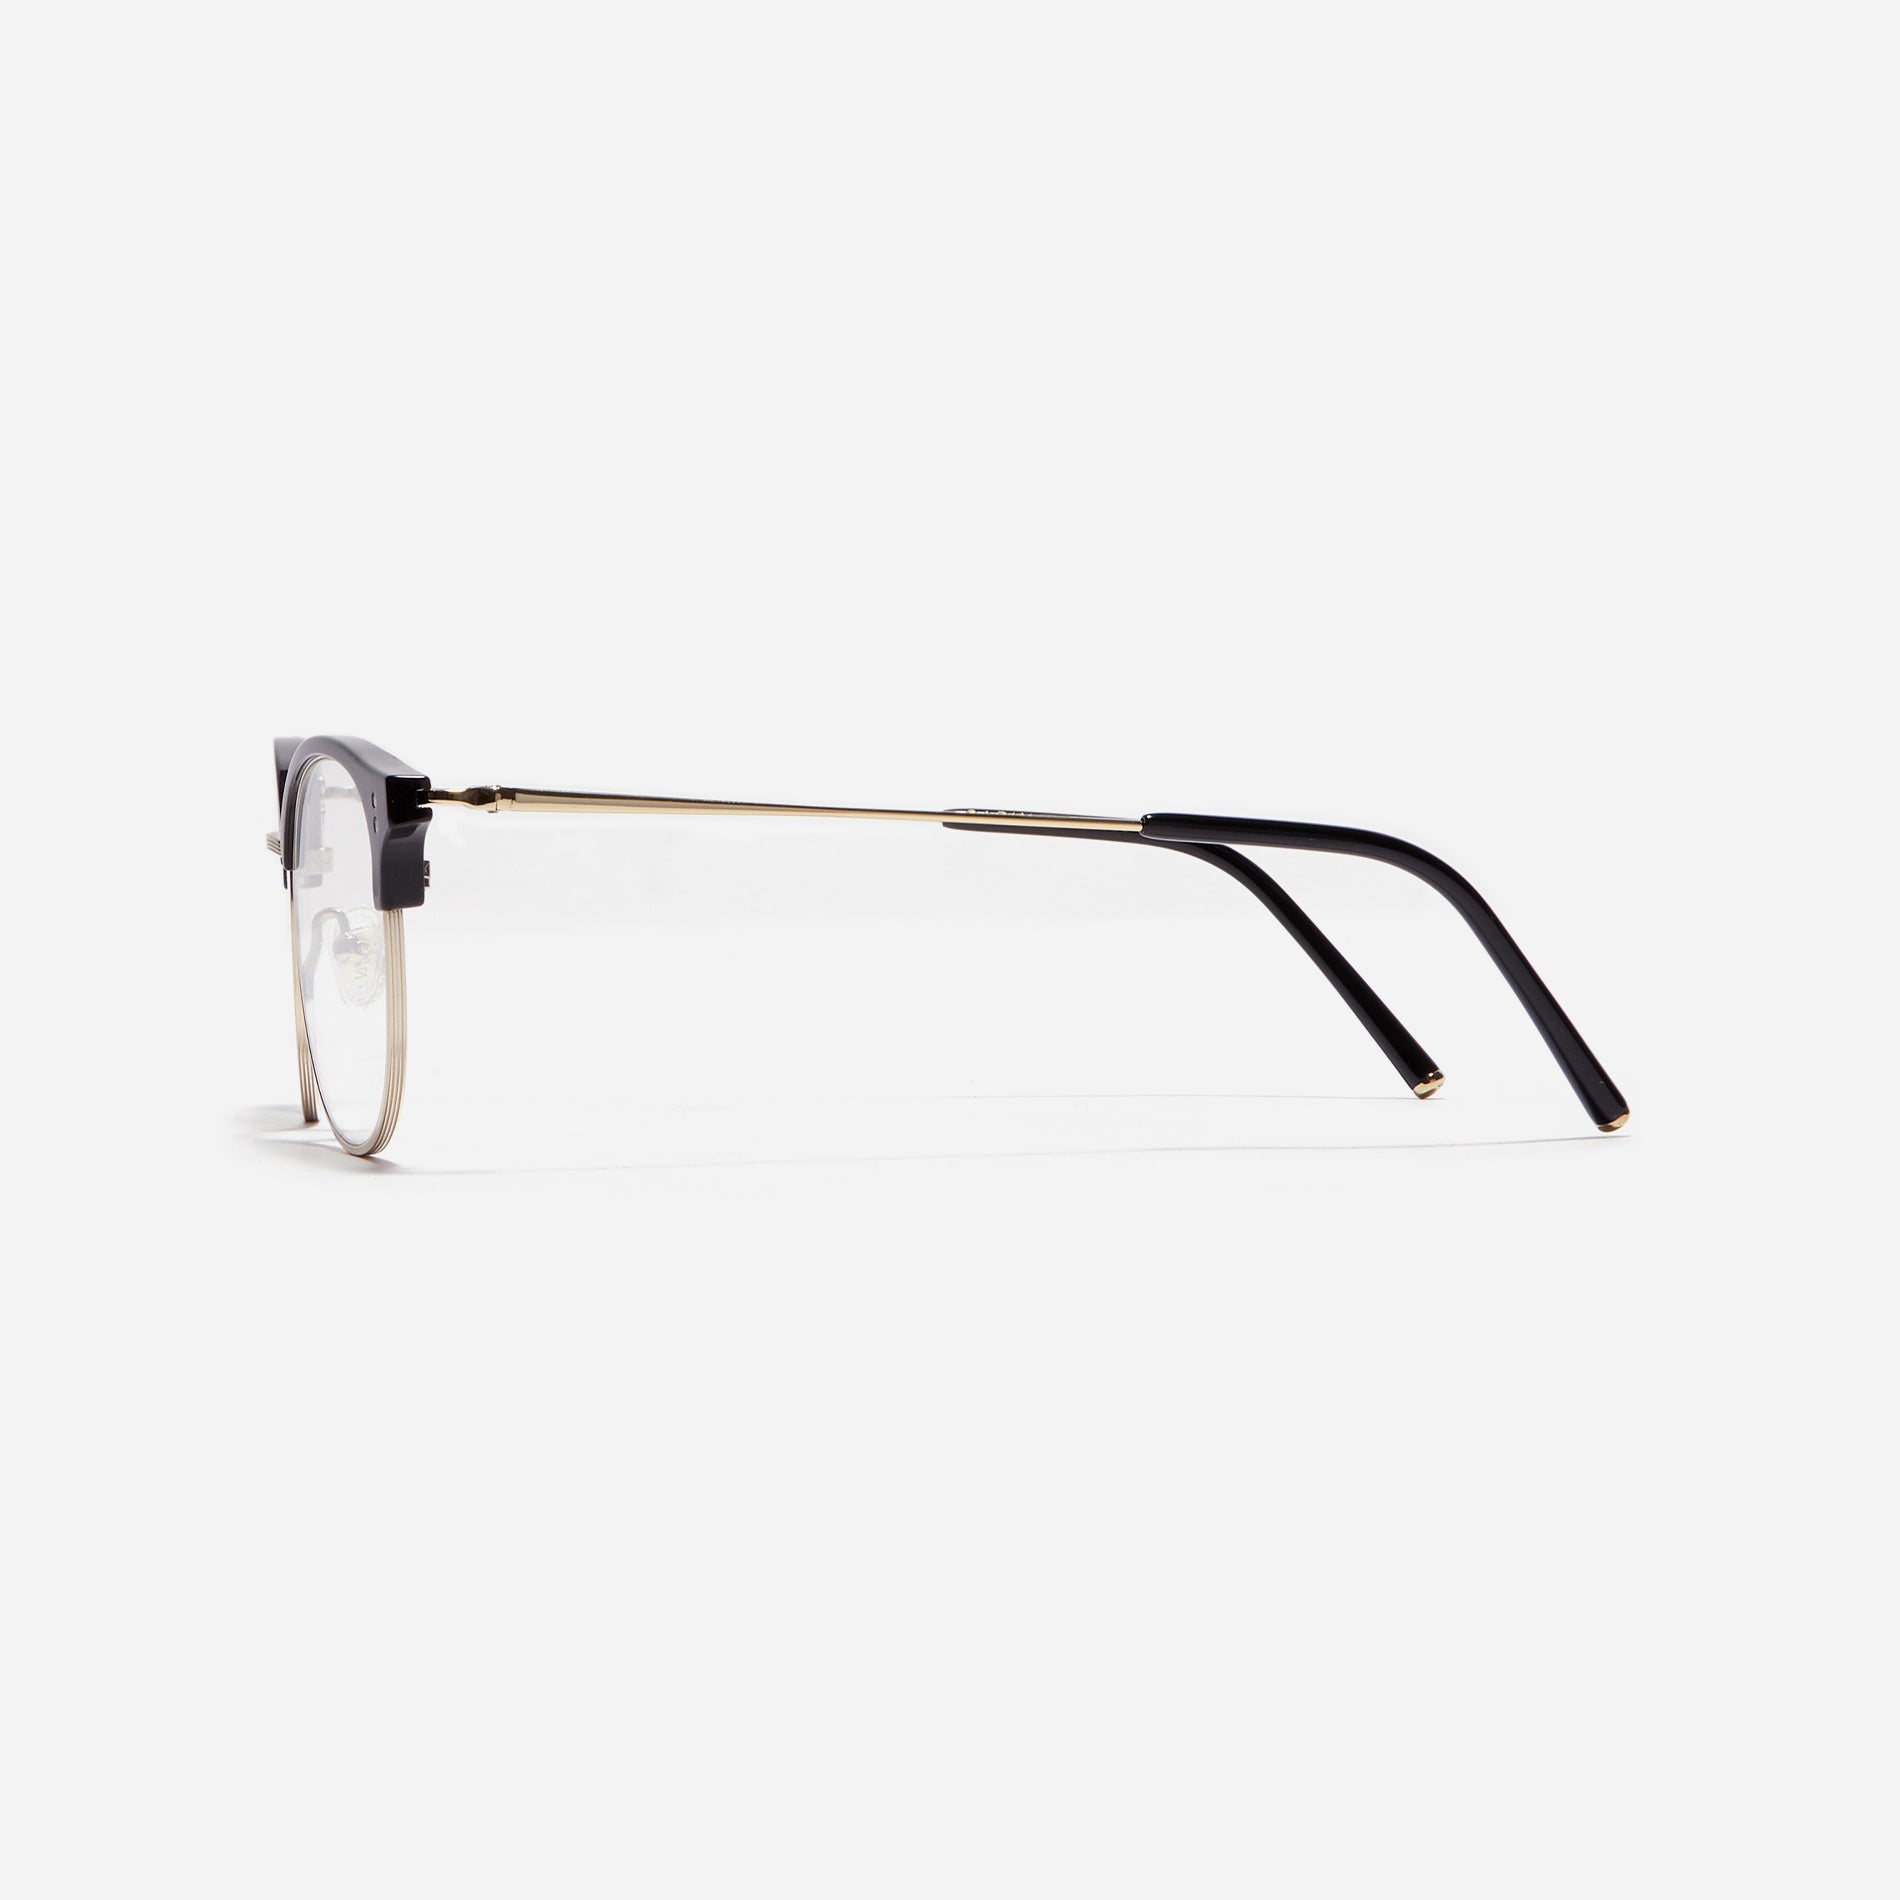 Square-shaped gold-rimmed eyeglasses. The frame, constructed from bioplastic and titanium, seamlessly merges exceptional durability with an ultra-lightweight build, while stylish nose bridge lining details enhance the overall design. The B-titanium temples deliver a lightweight and comfortable fit, guaranteeing prolonged wear without any discomfort.